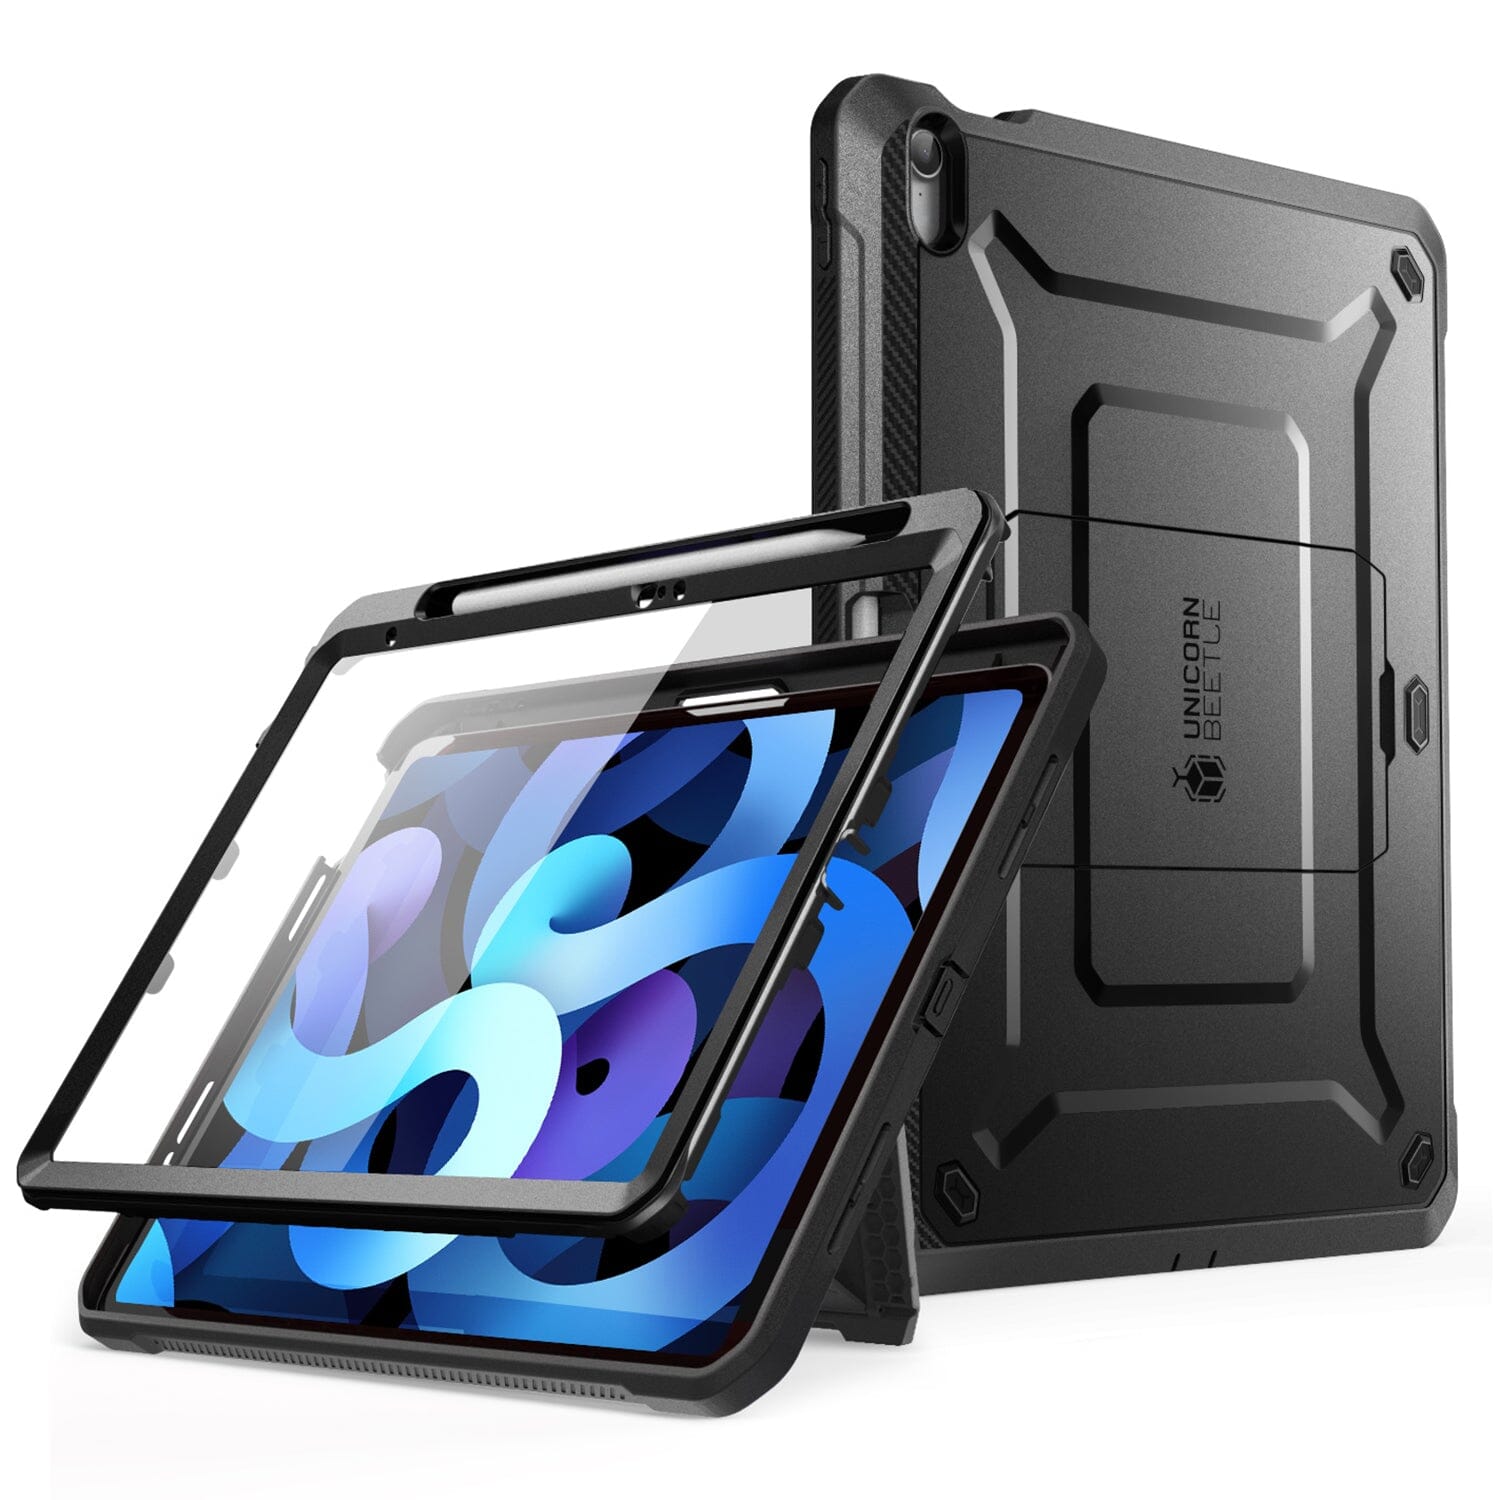 SUPCASE Unicorn Beetle Pro Series Case Designed for iPad 10th Generation, with Built-in Screen Protector and Dual Layer Full Body Rugged Protective Case for iPad 10.9 Inch 2022 iPad Case Supcase Black 